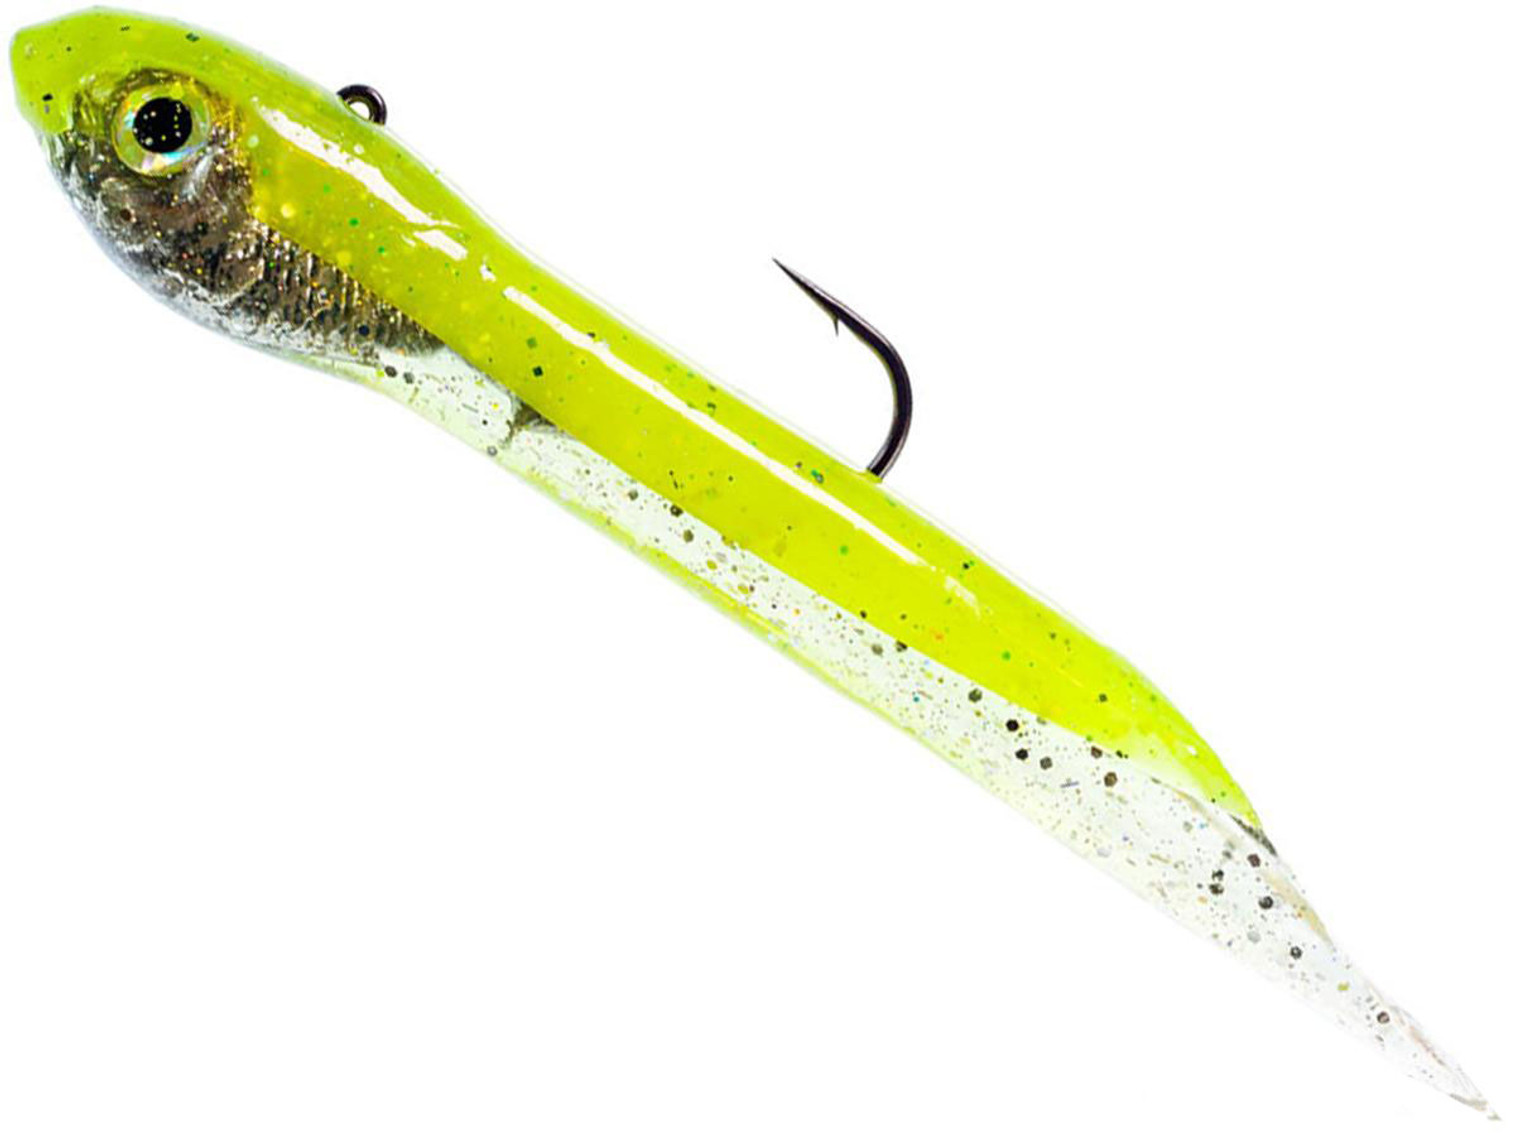 Hook Up Baits Handcrafted Soft Fishing Jigs - Glow Green Silver